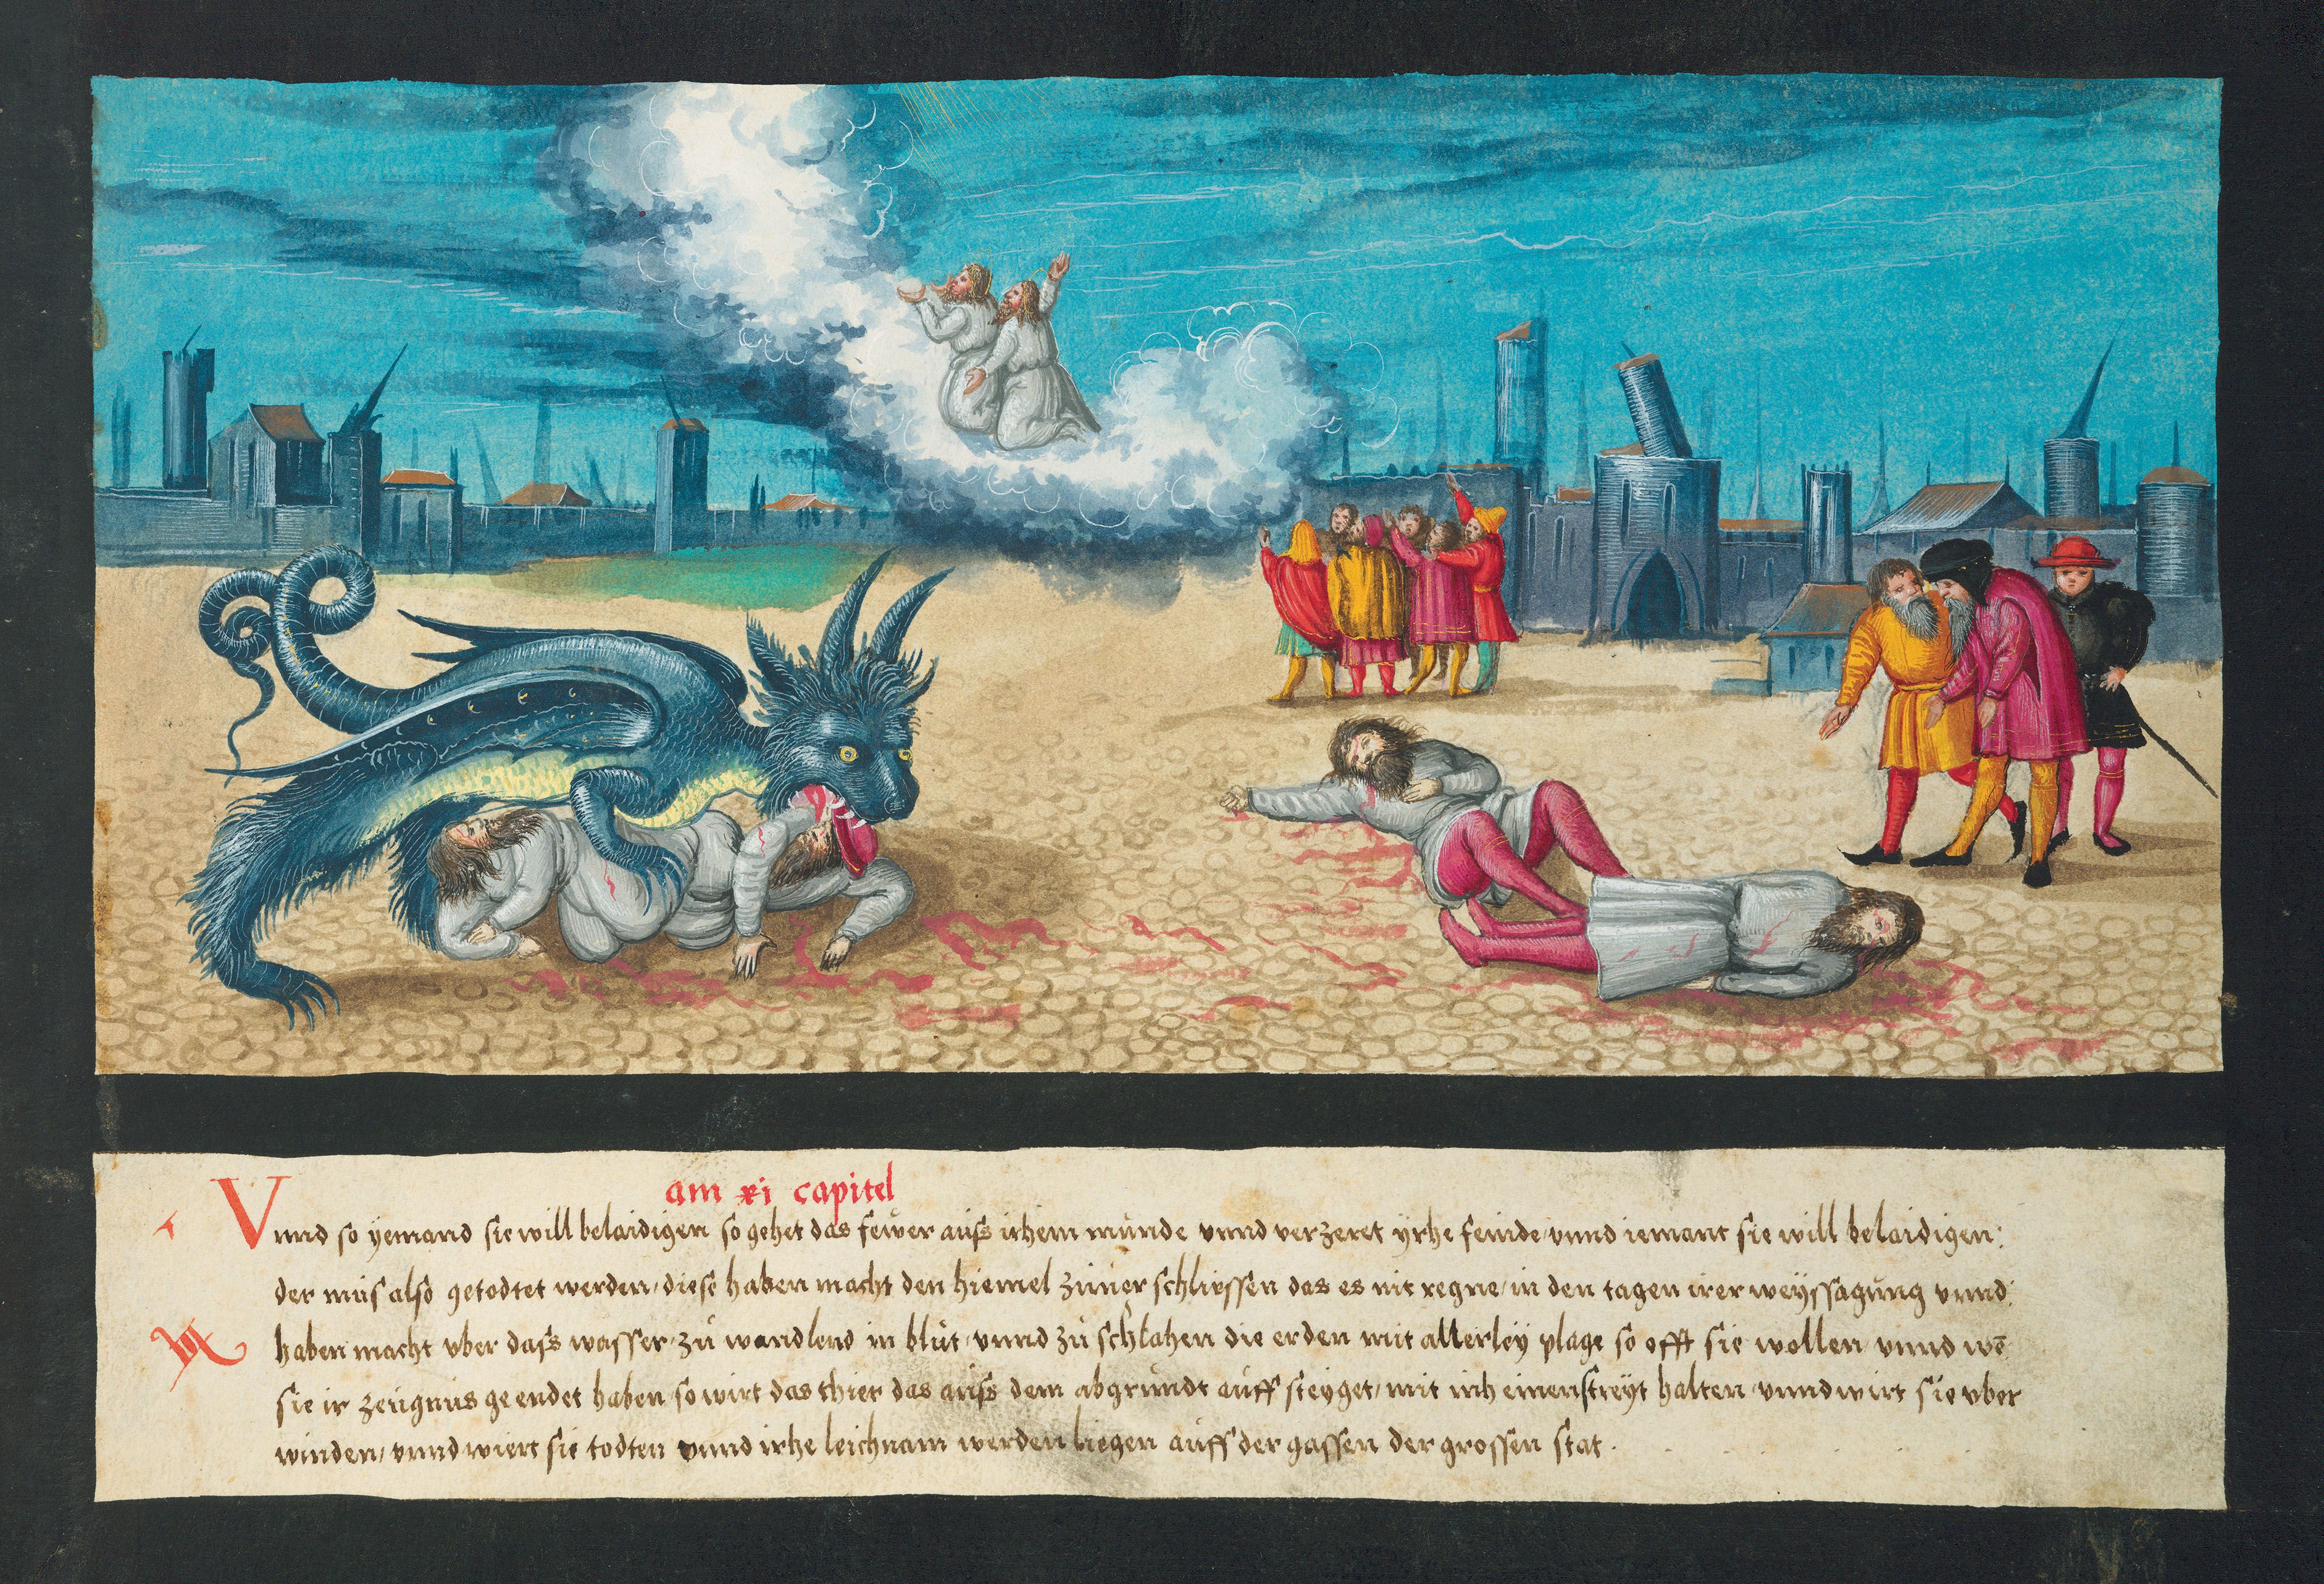 Terrifying visions of the Apocalypse revealed the fears of medieval Spain